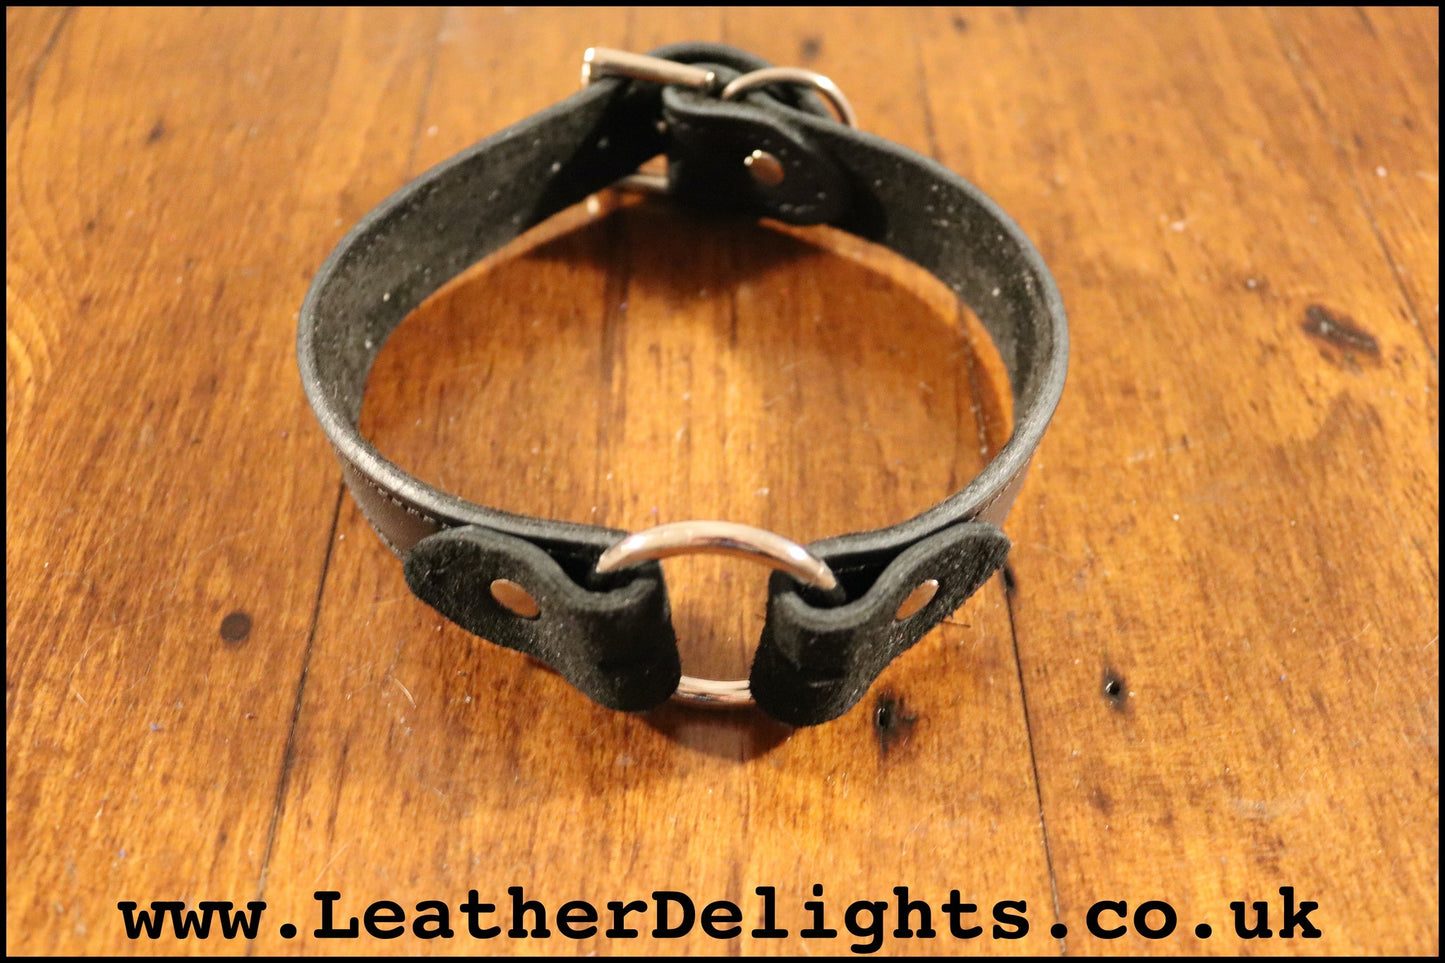 1" Wide O Ring Collar - Leather Delights